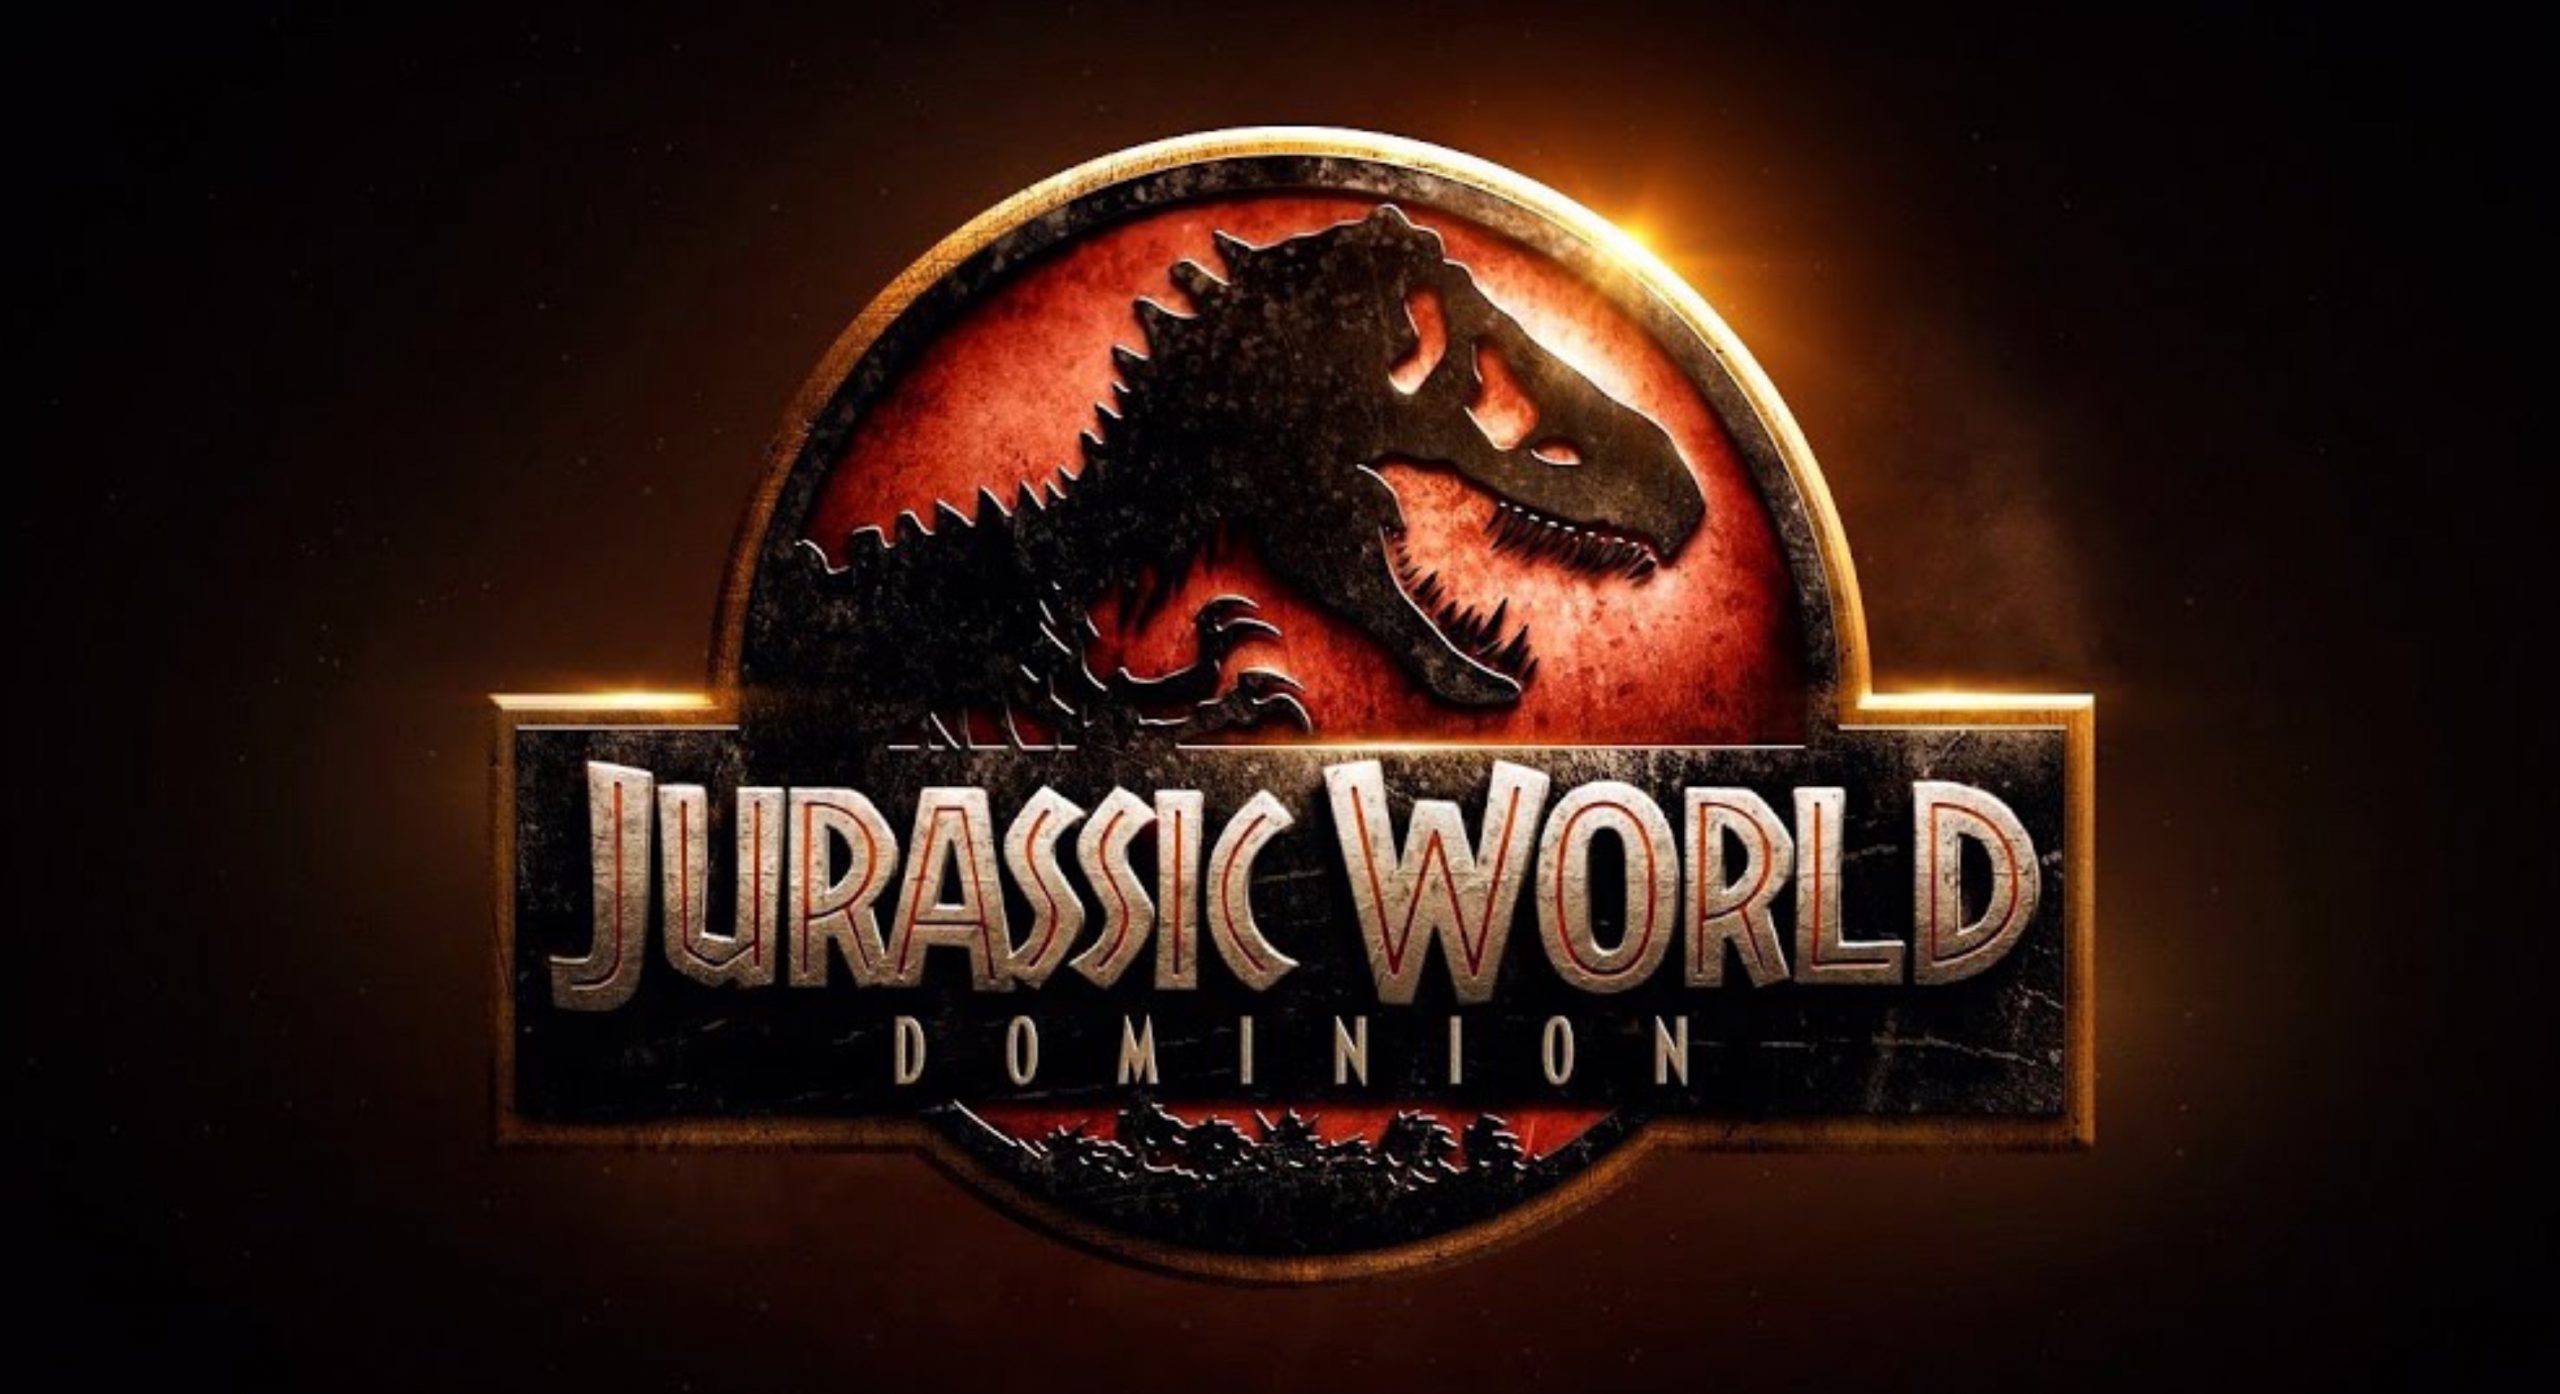 ‘Jurassic World: Dominion’ Will Not Be the Last Film in the Jurassic Park Franchise